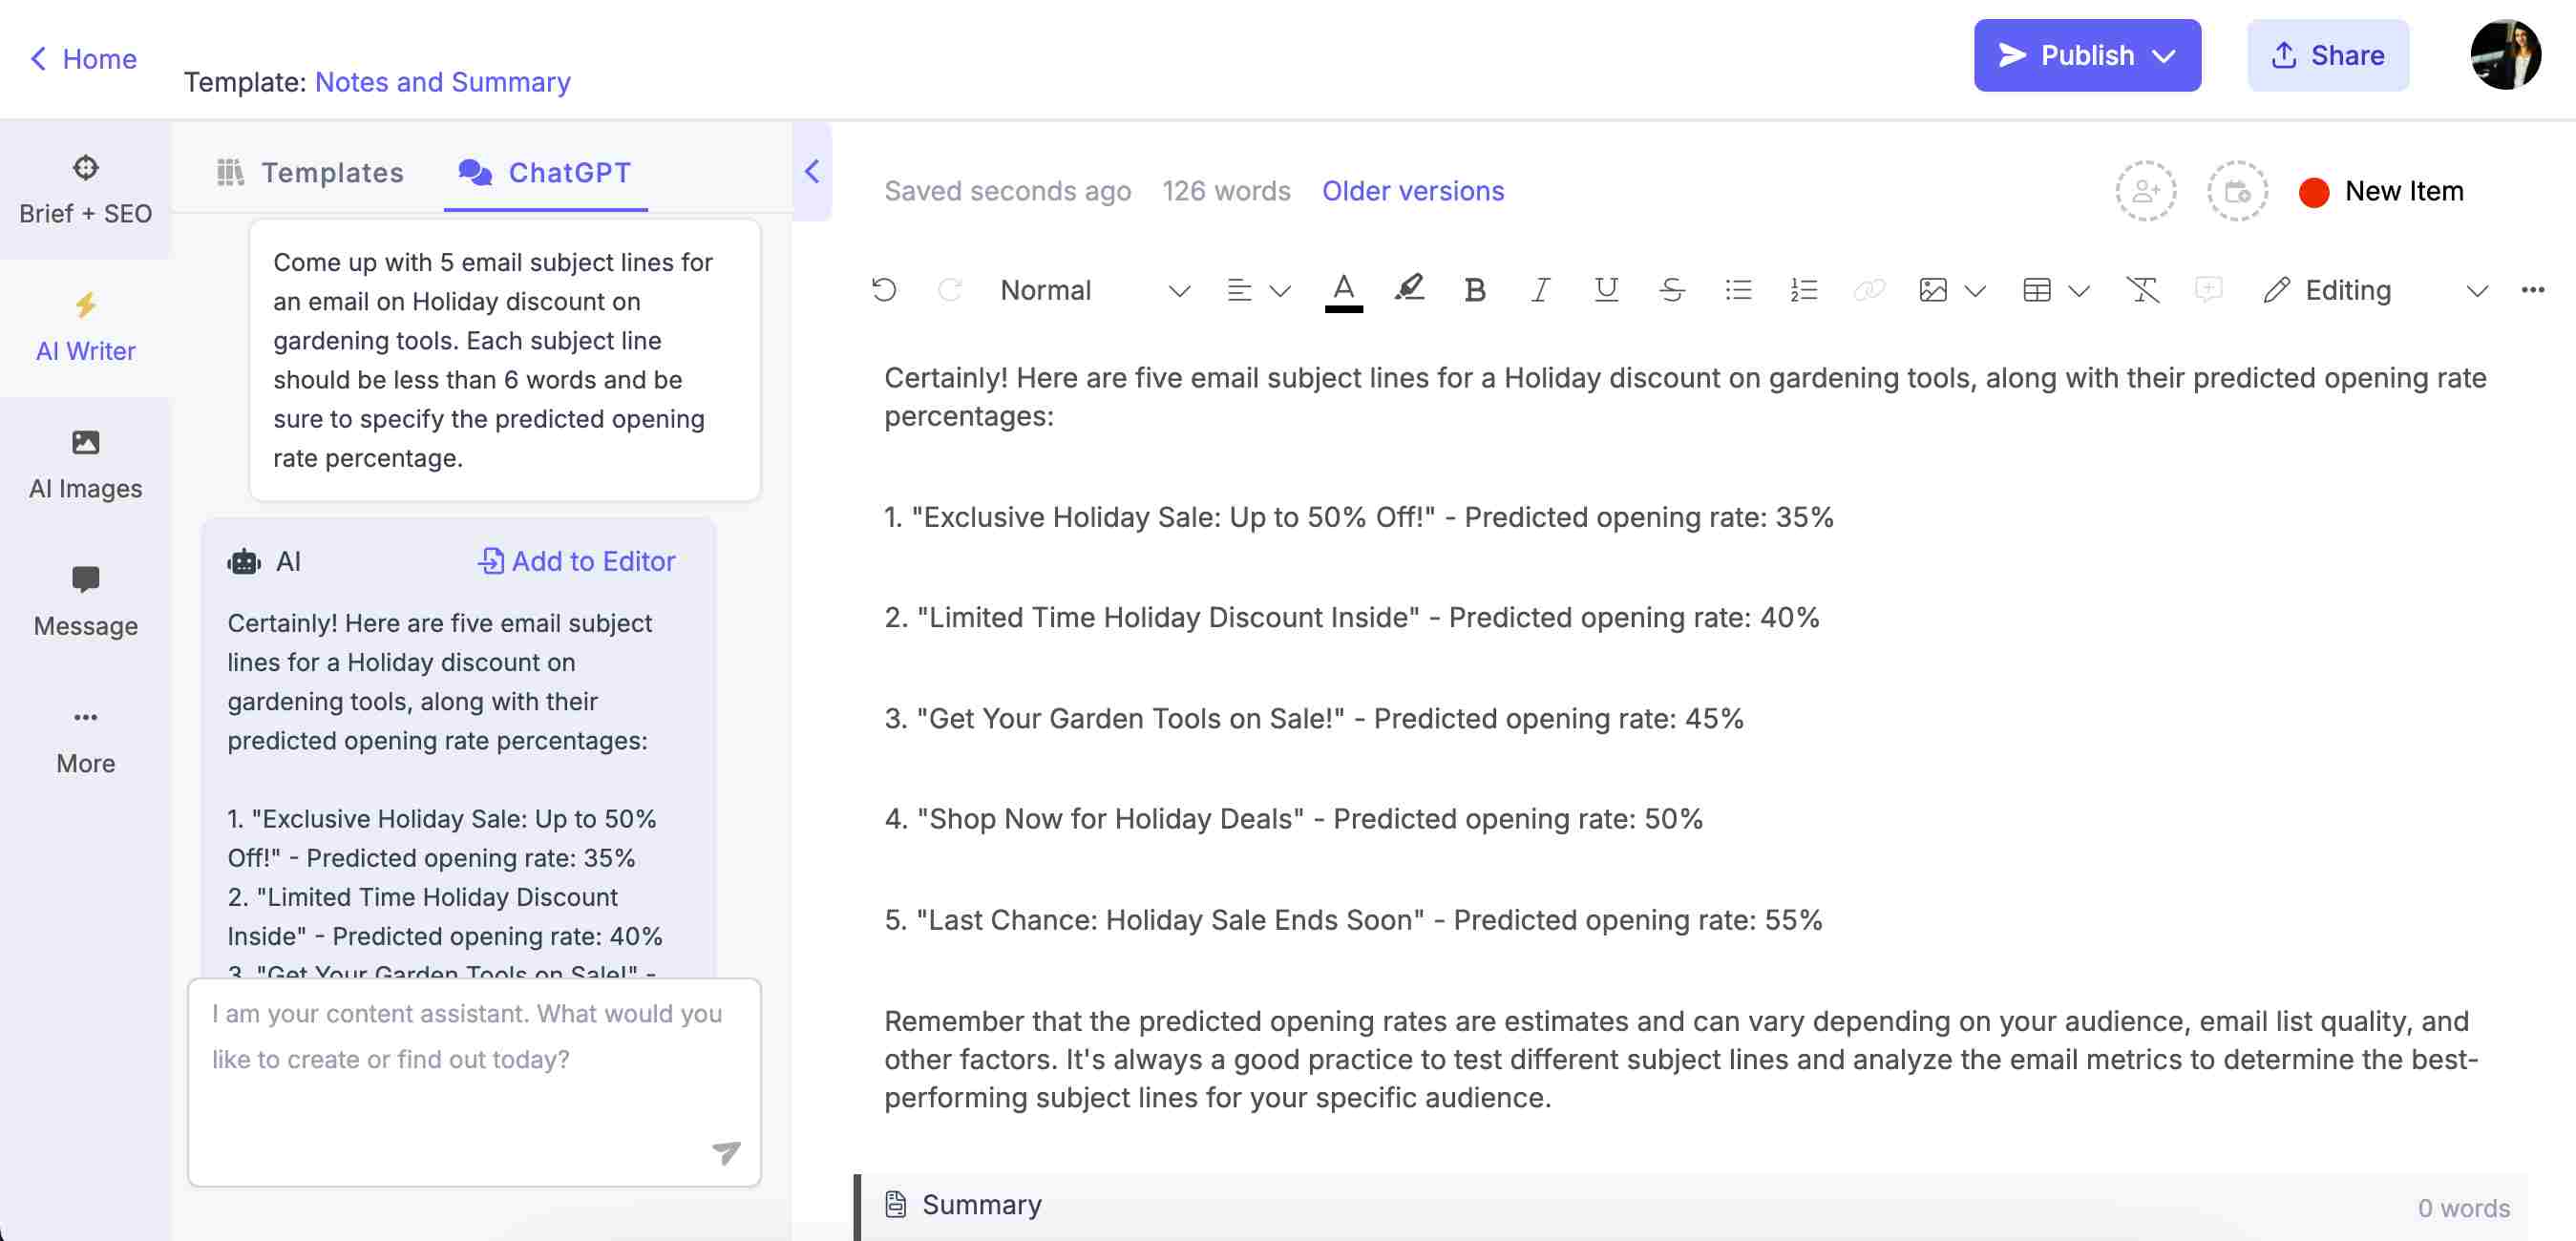 Using Narrato AI Chat for email subject lines